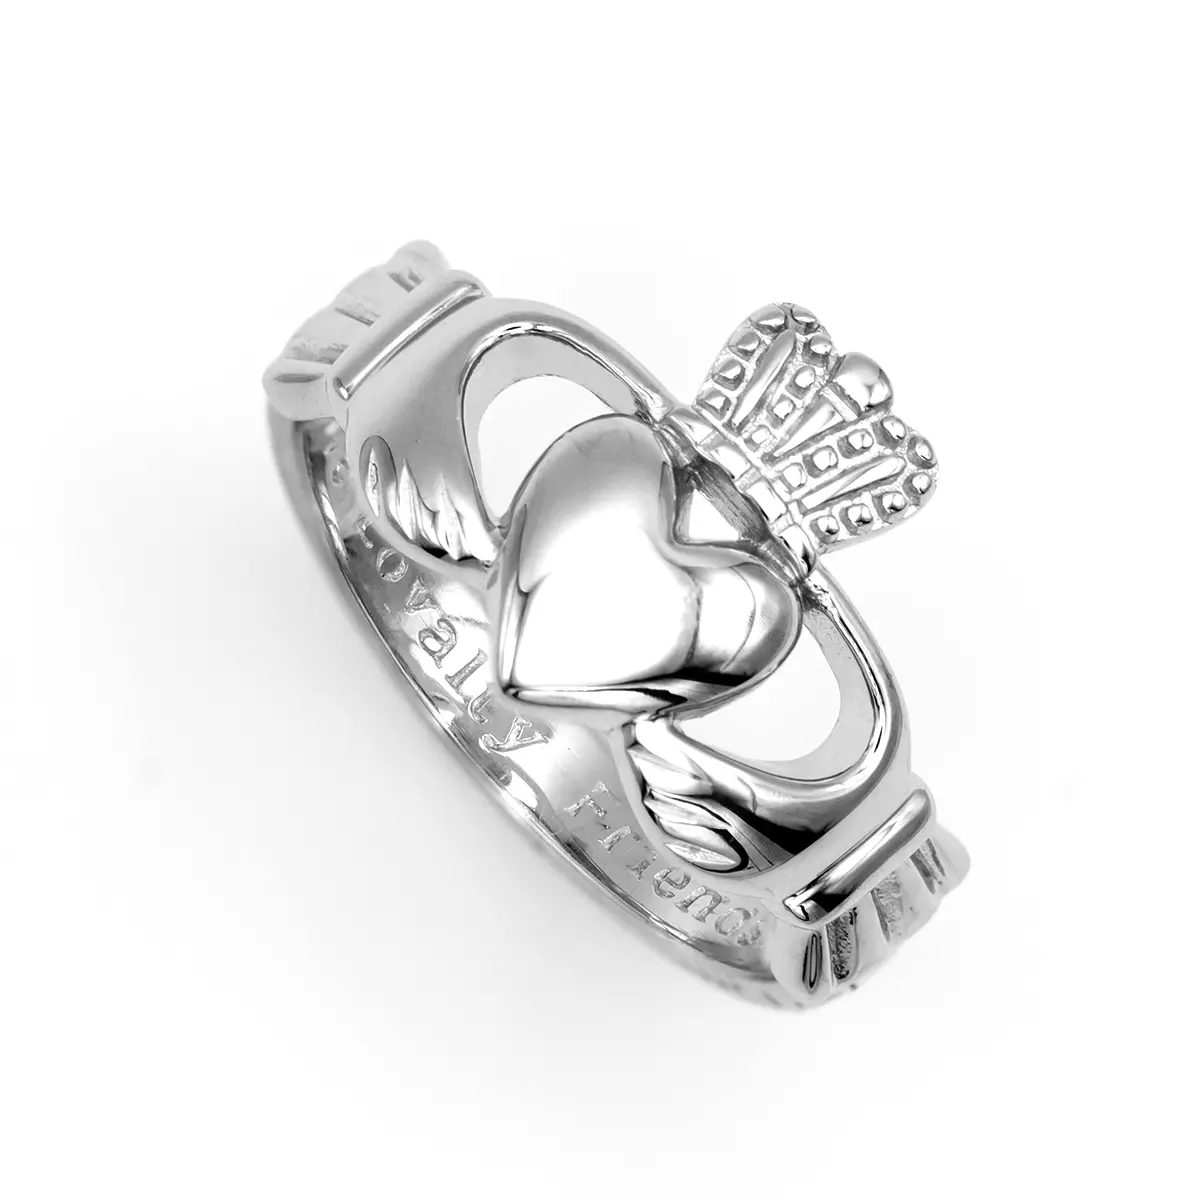 Gents Irish Claddagh Ring in Sterling Silver...